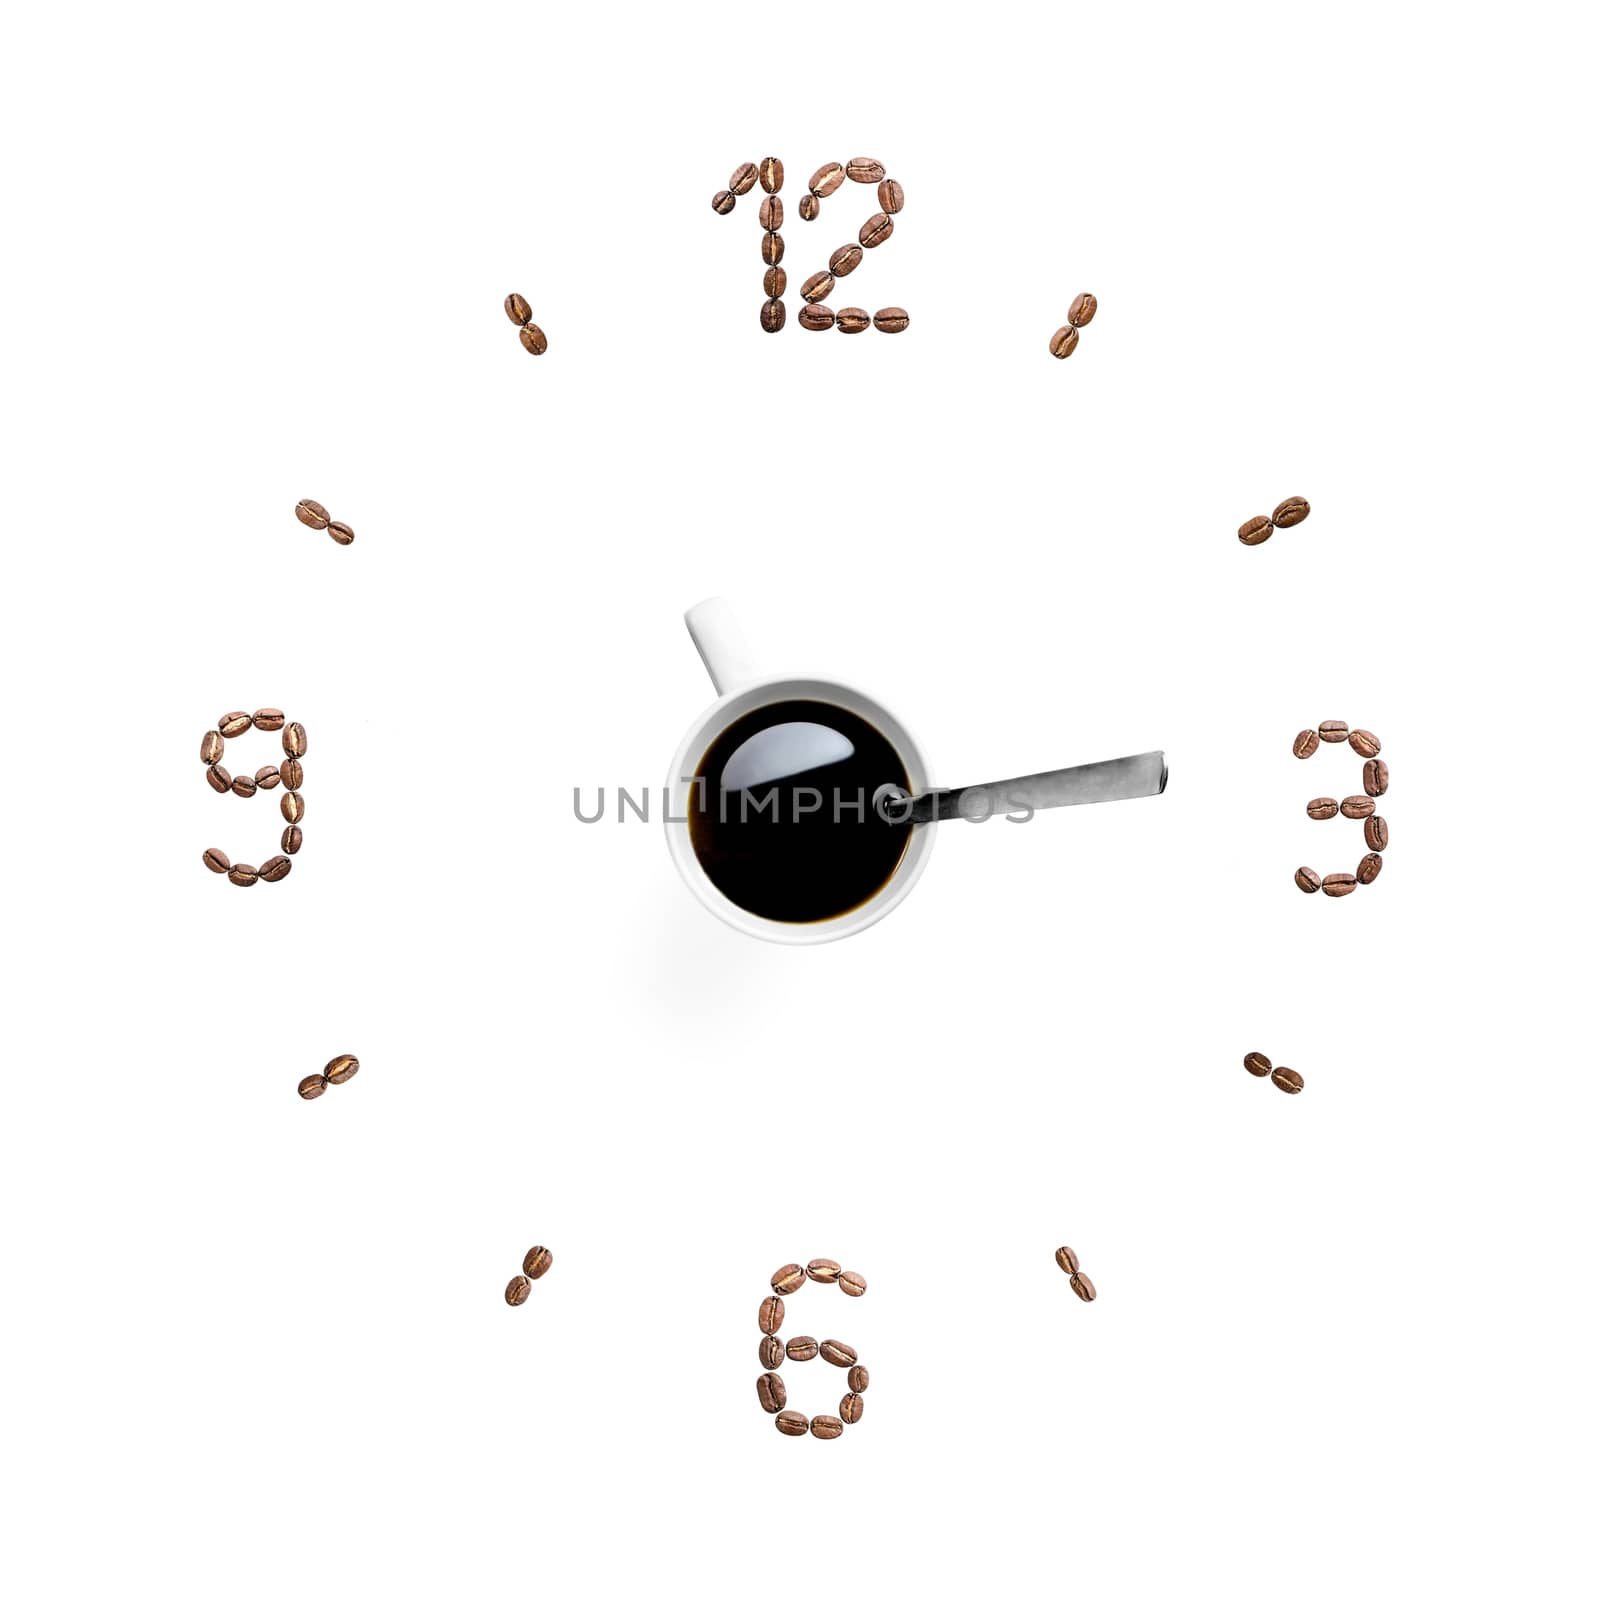 Business time concept displayed as a coffee beans clock.